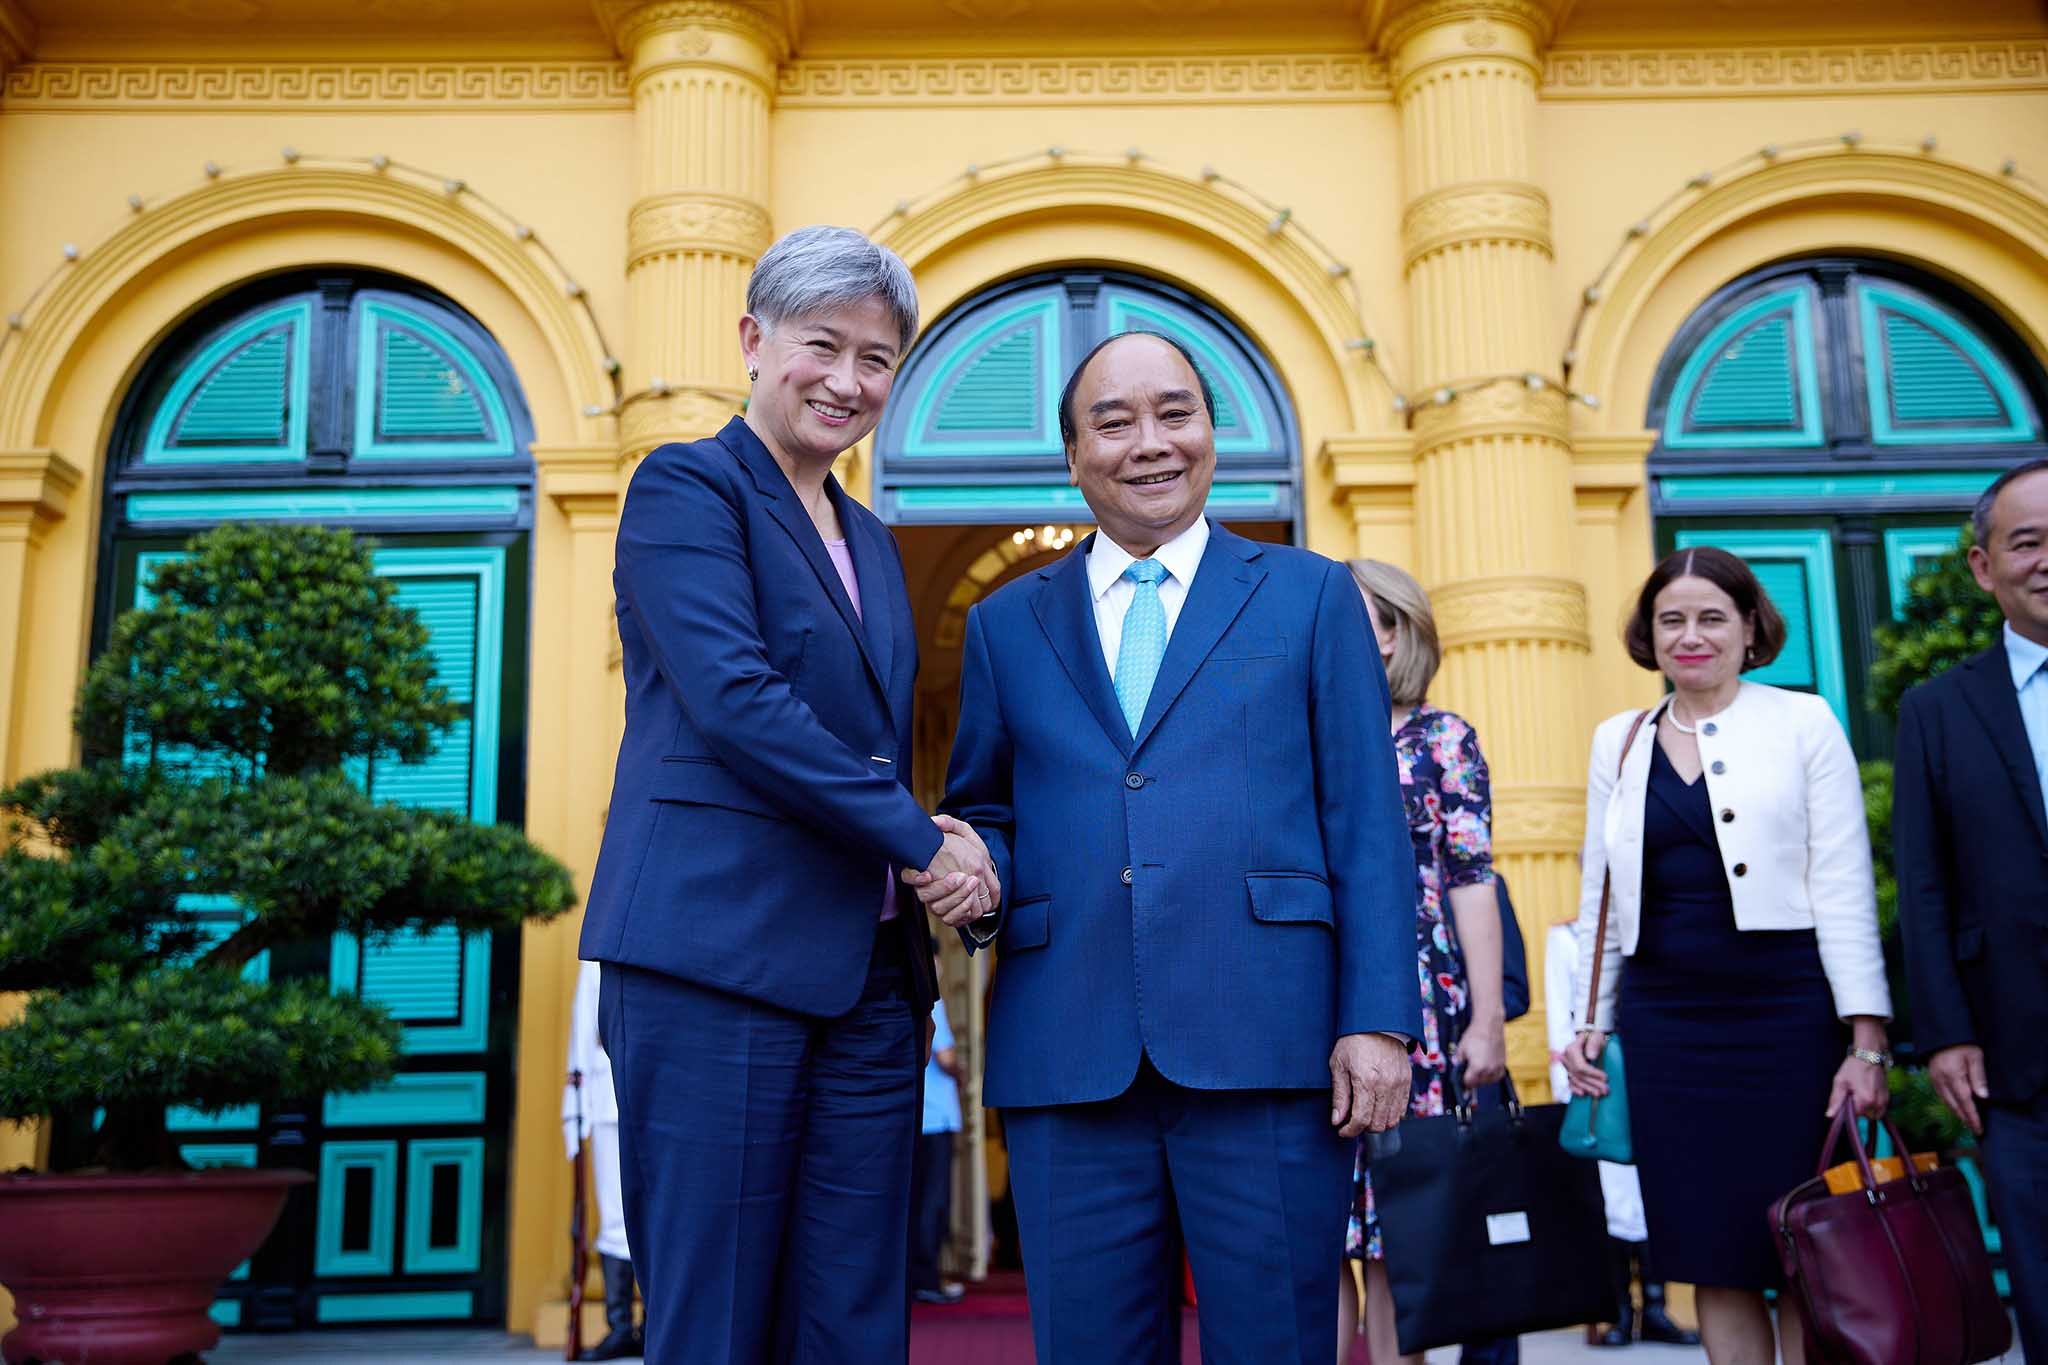 Visit of Australia’s Minister for Foreign Affairs to Hanoi